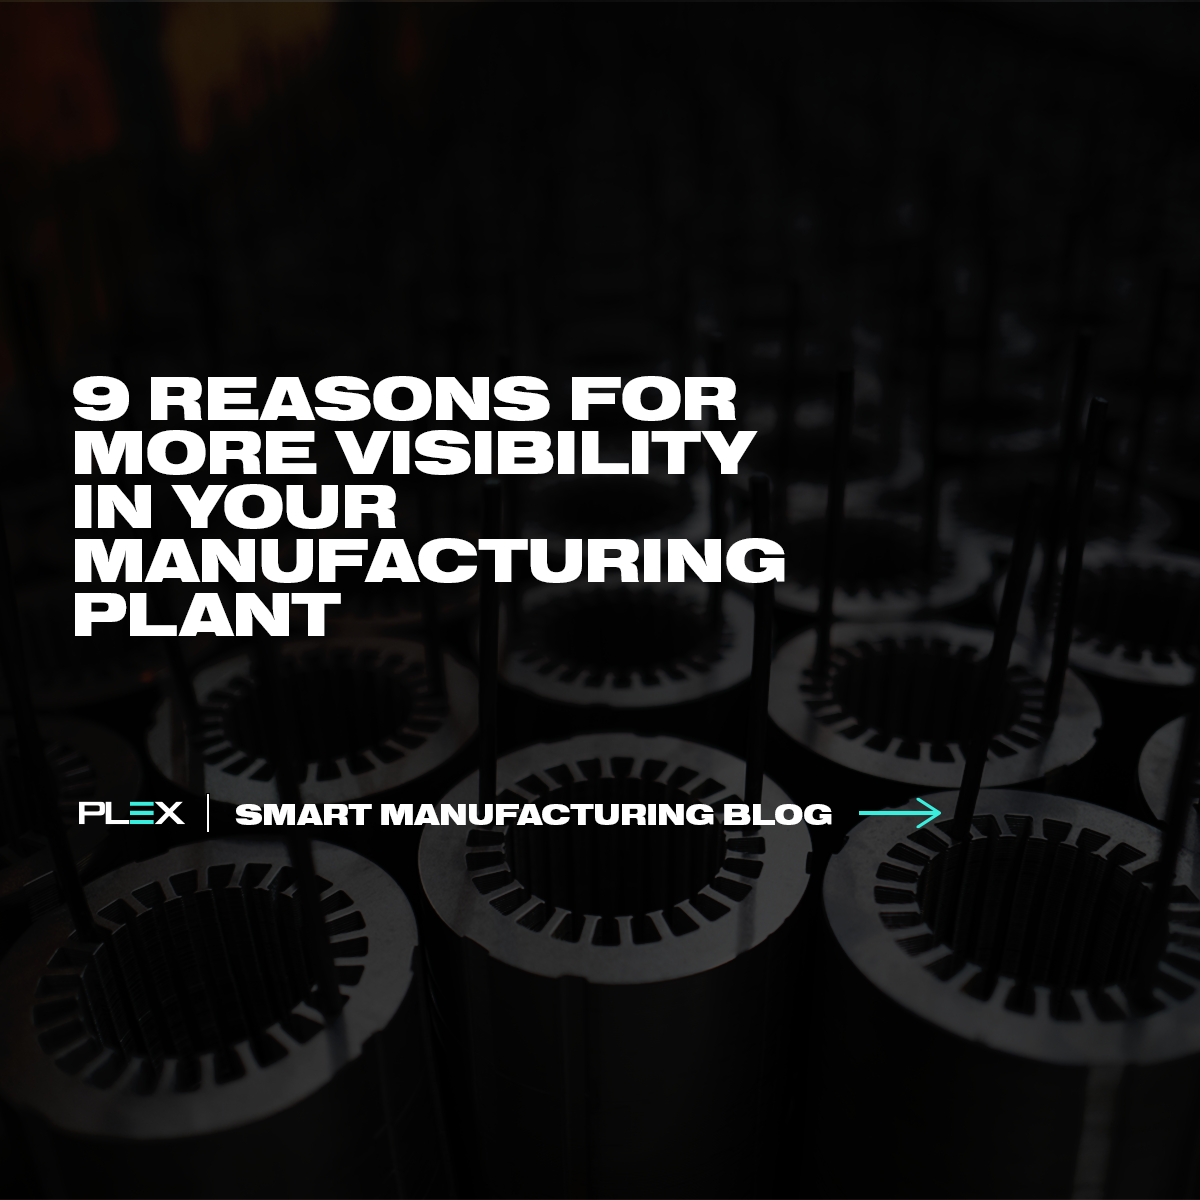 9 Reasons for More Visibility in Your Manufacturing Plant